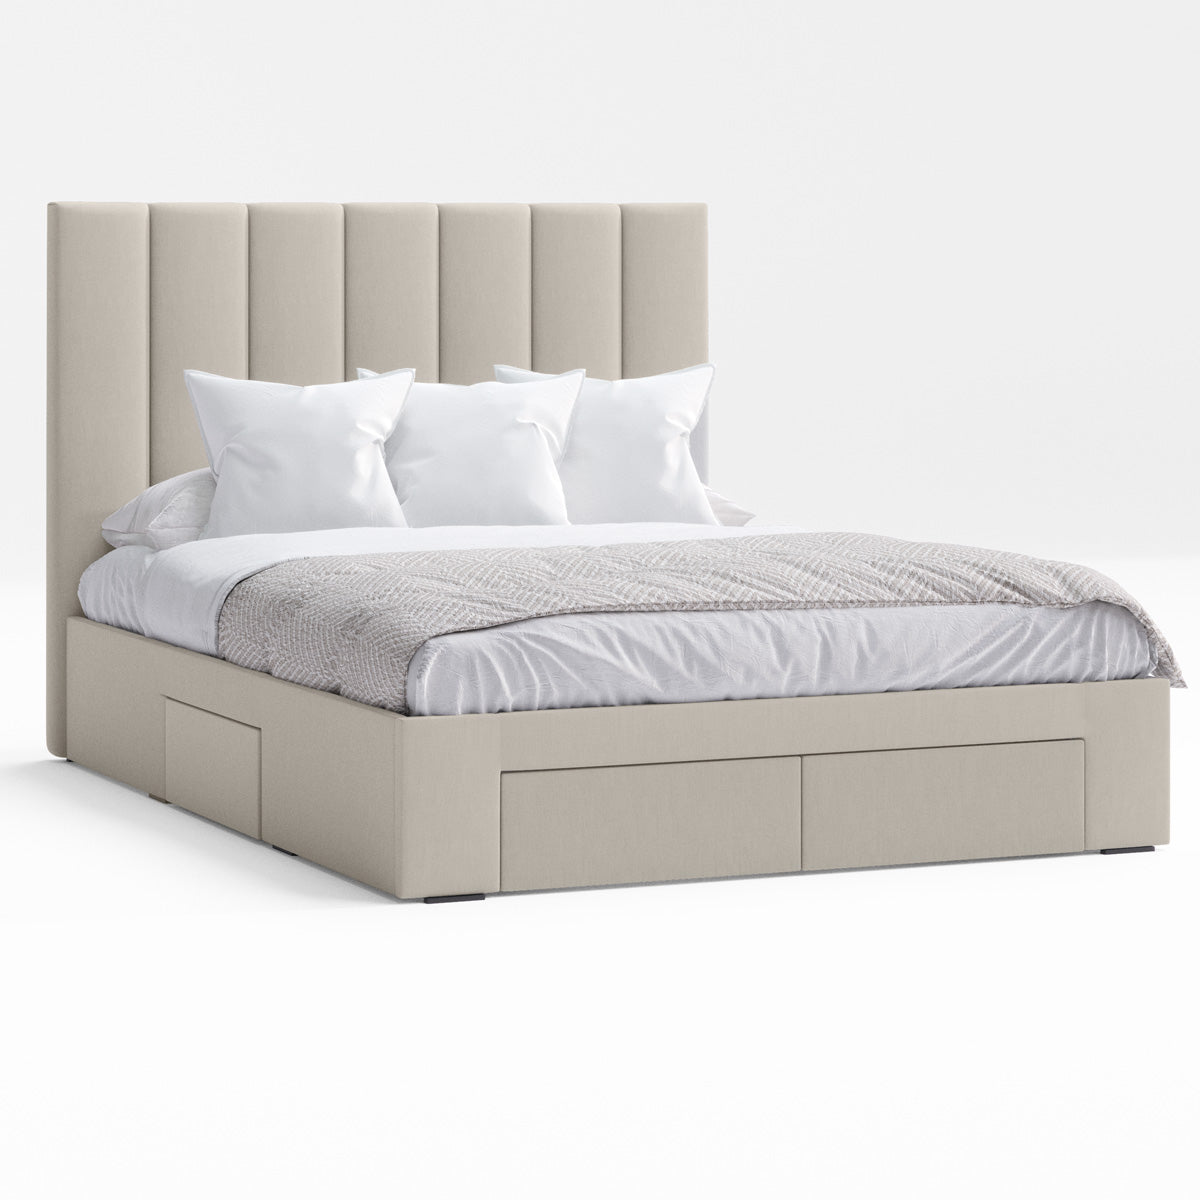 Celine Bed Frame with Four Extra Large Drawers (Natural Beige Fabric)